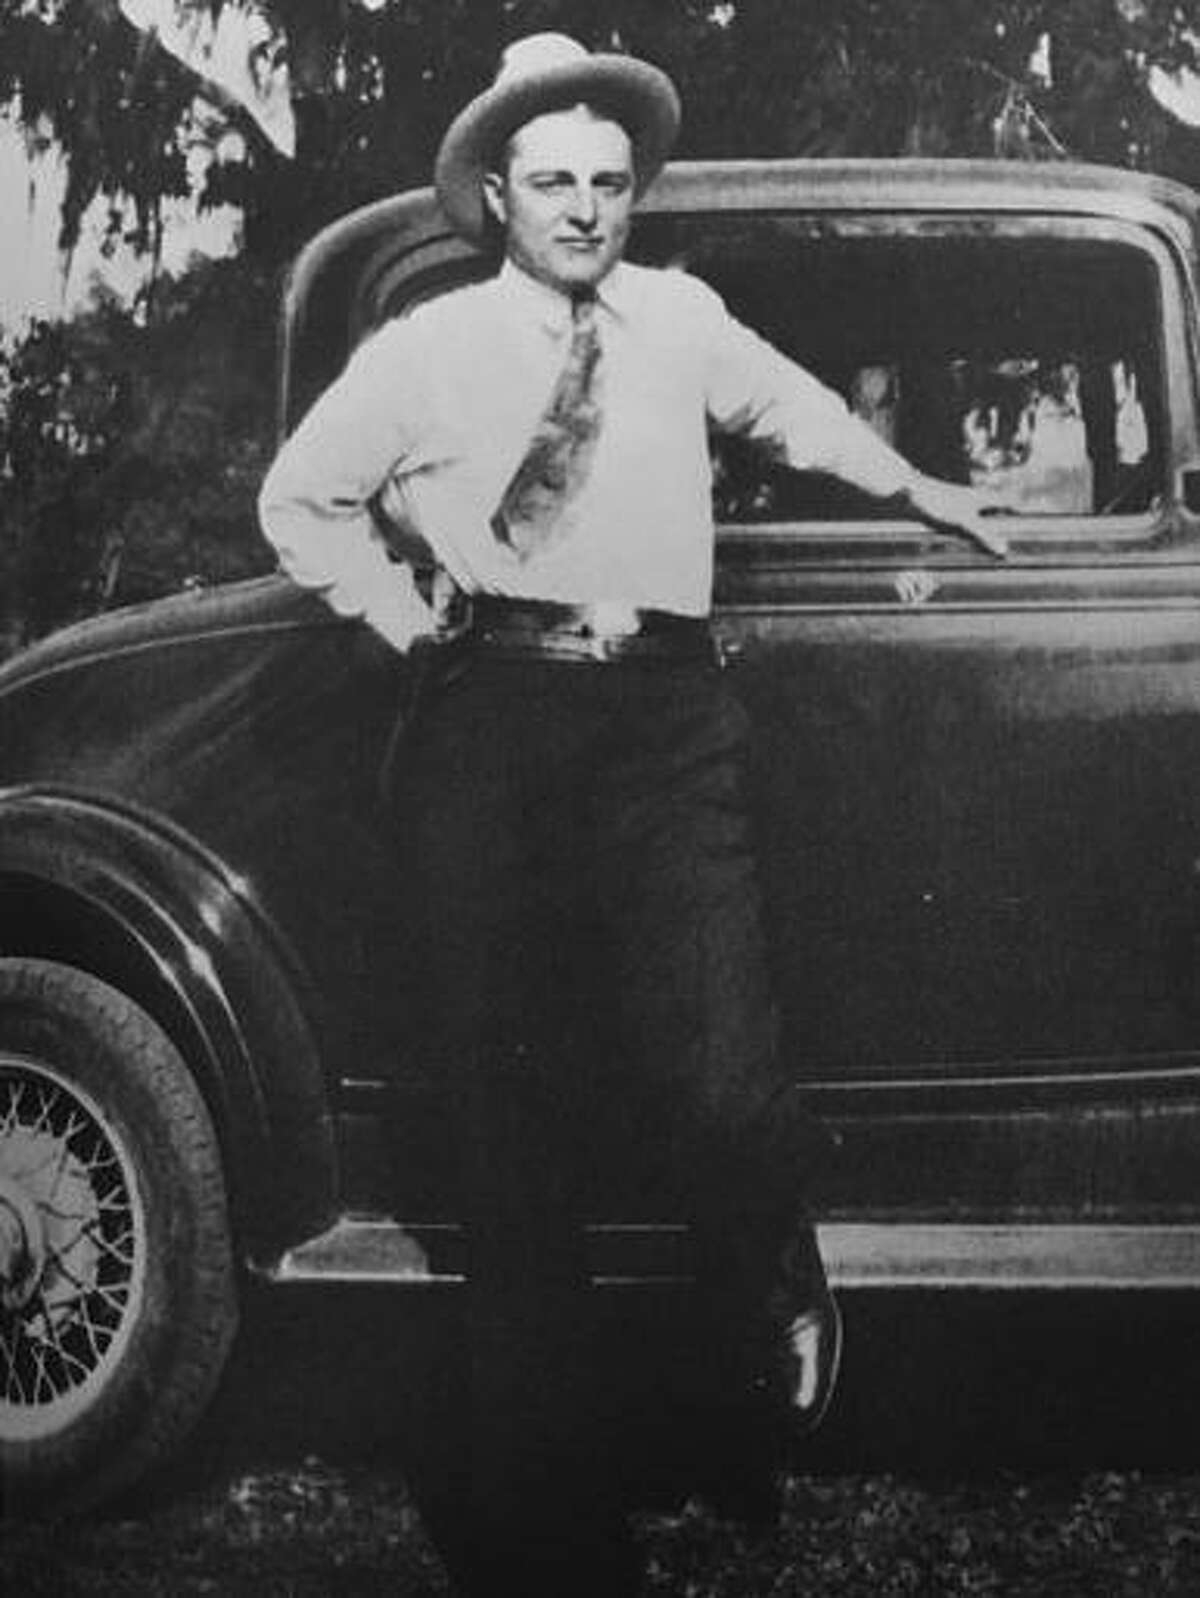 Clint Peoples as a deputy sheriff in Montgomery County in 1932